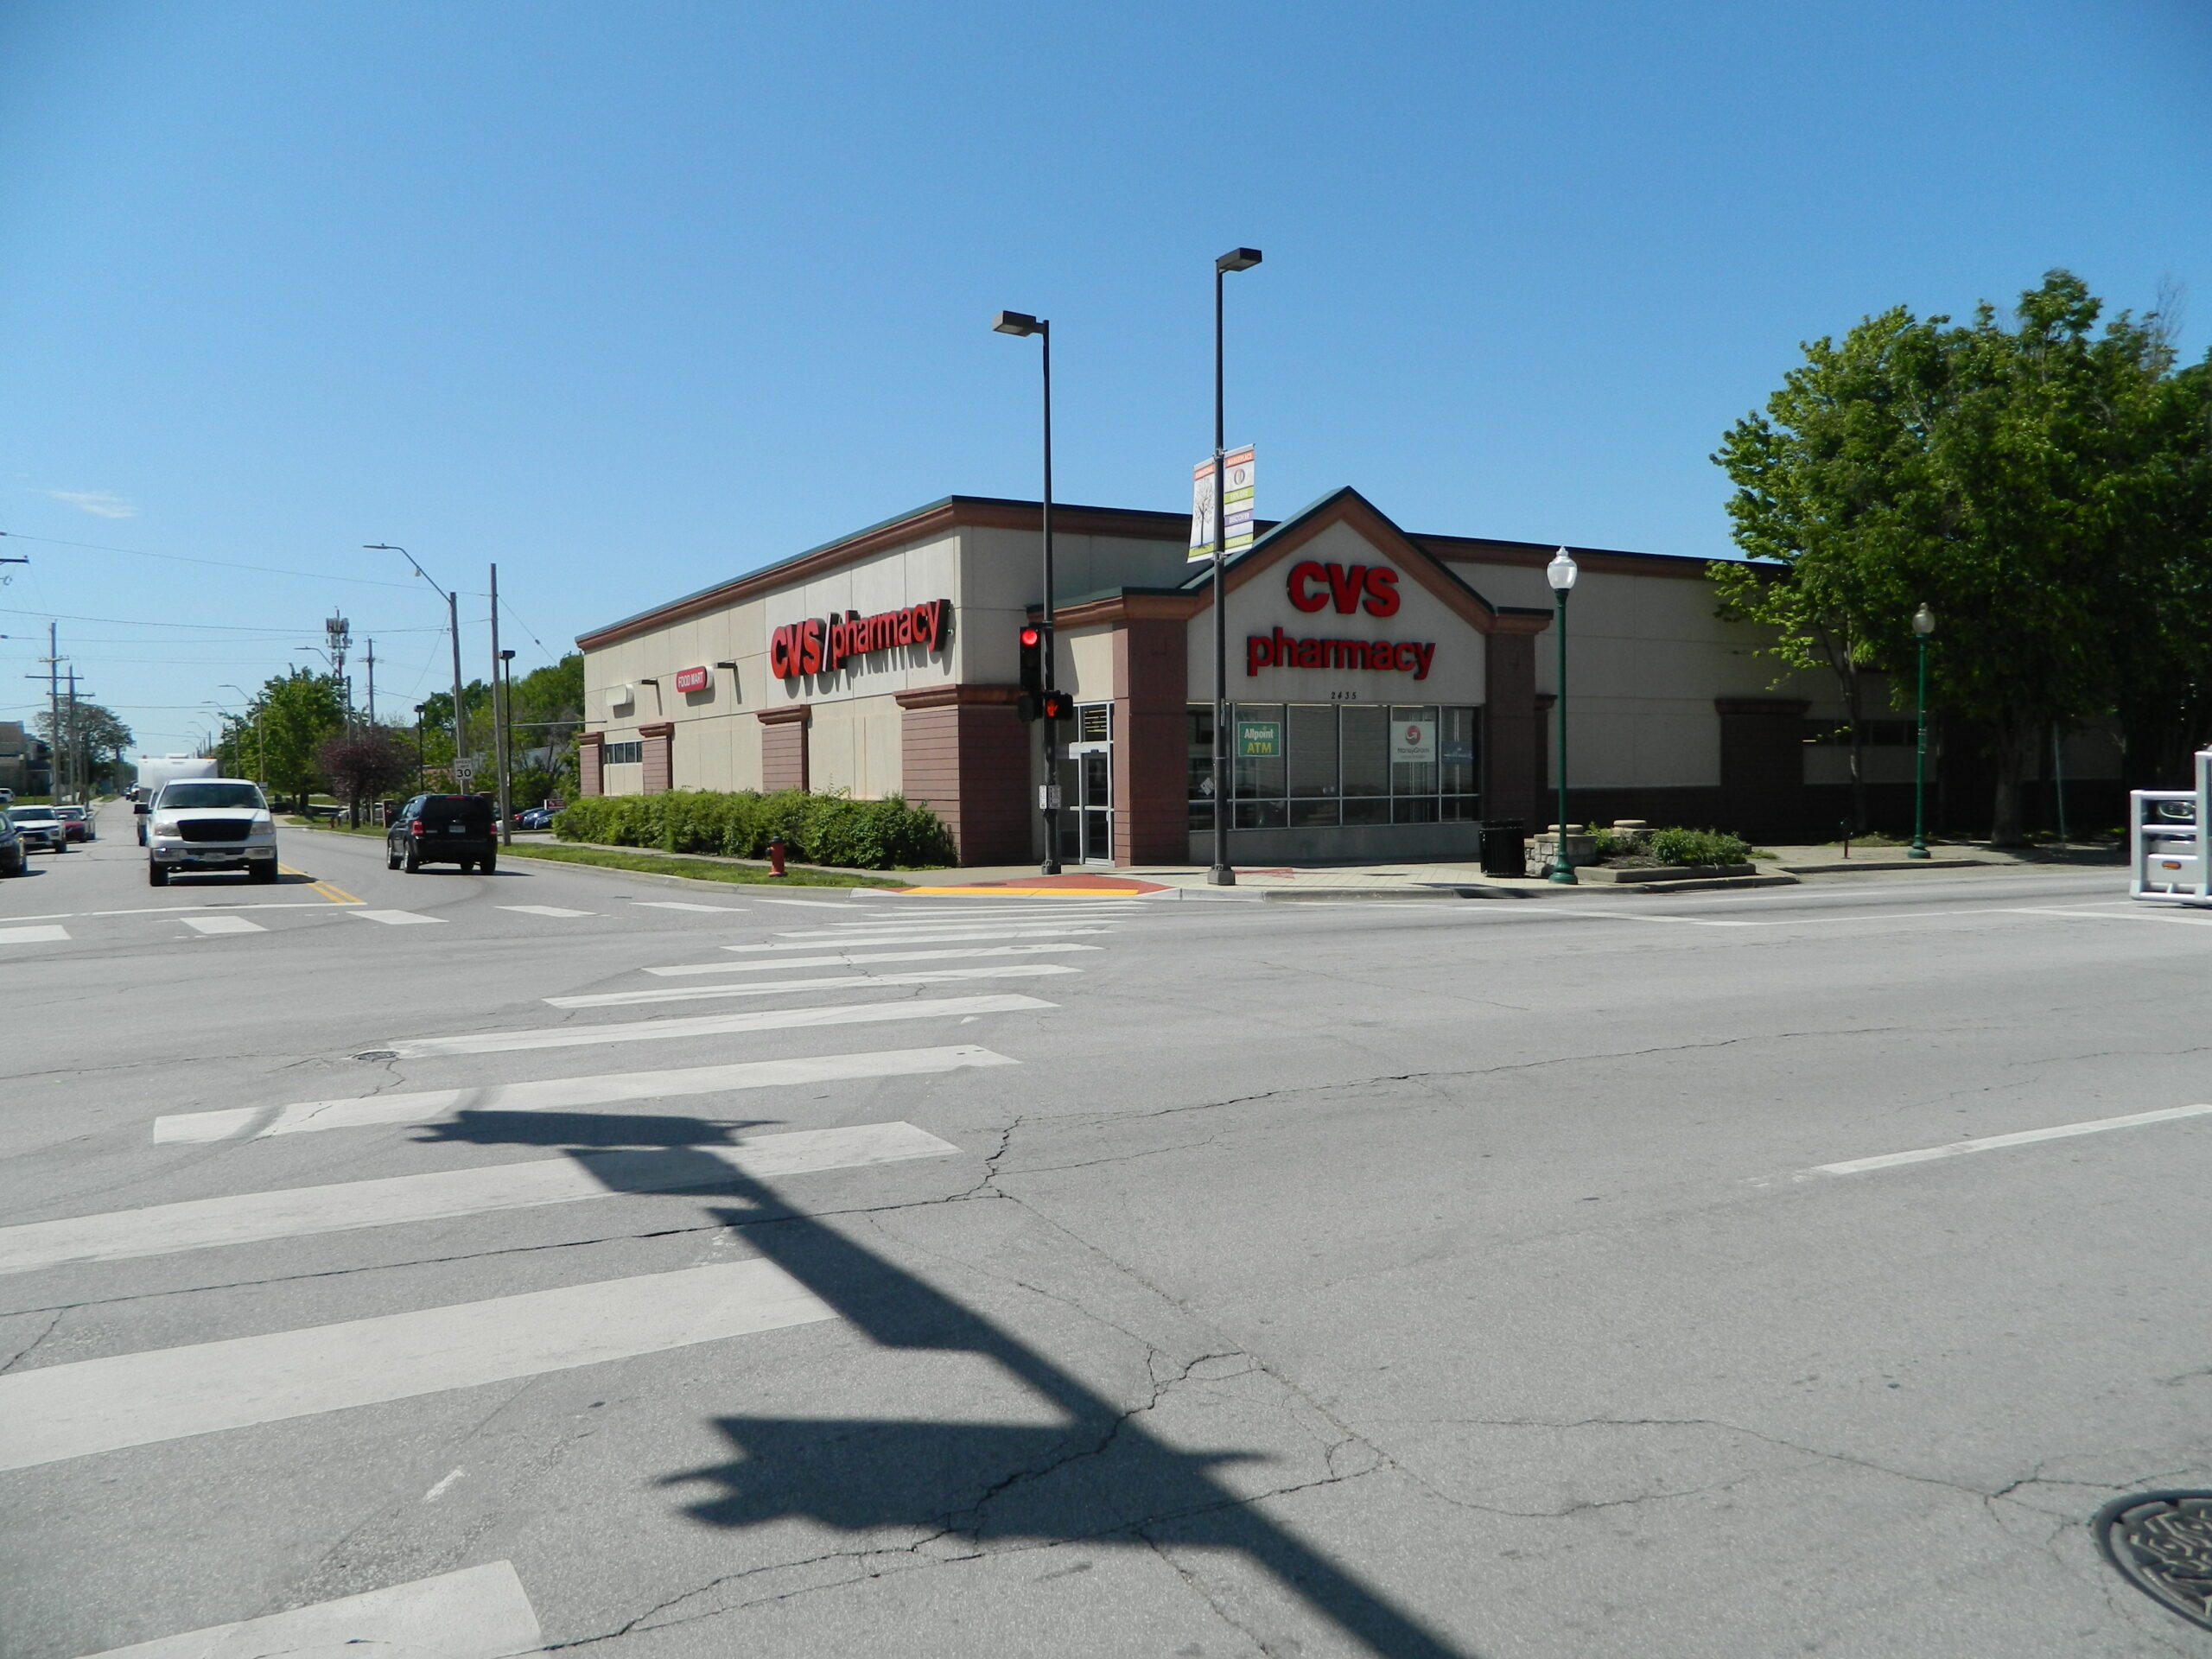 CVS Abandons the Avenue: Theft and Sales cited as primary reasons for closure